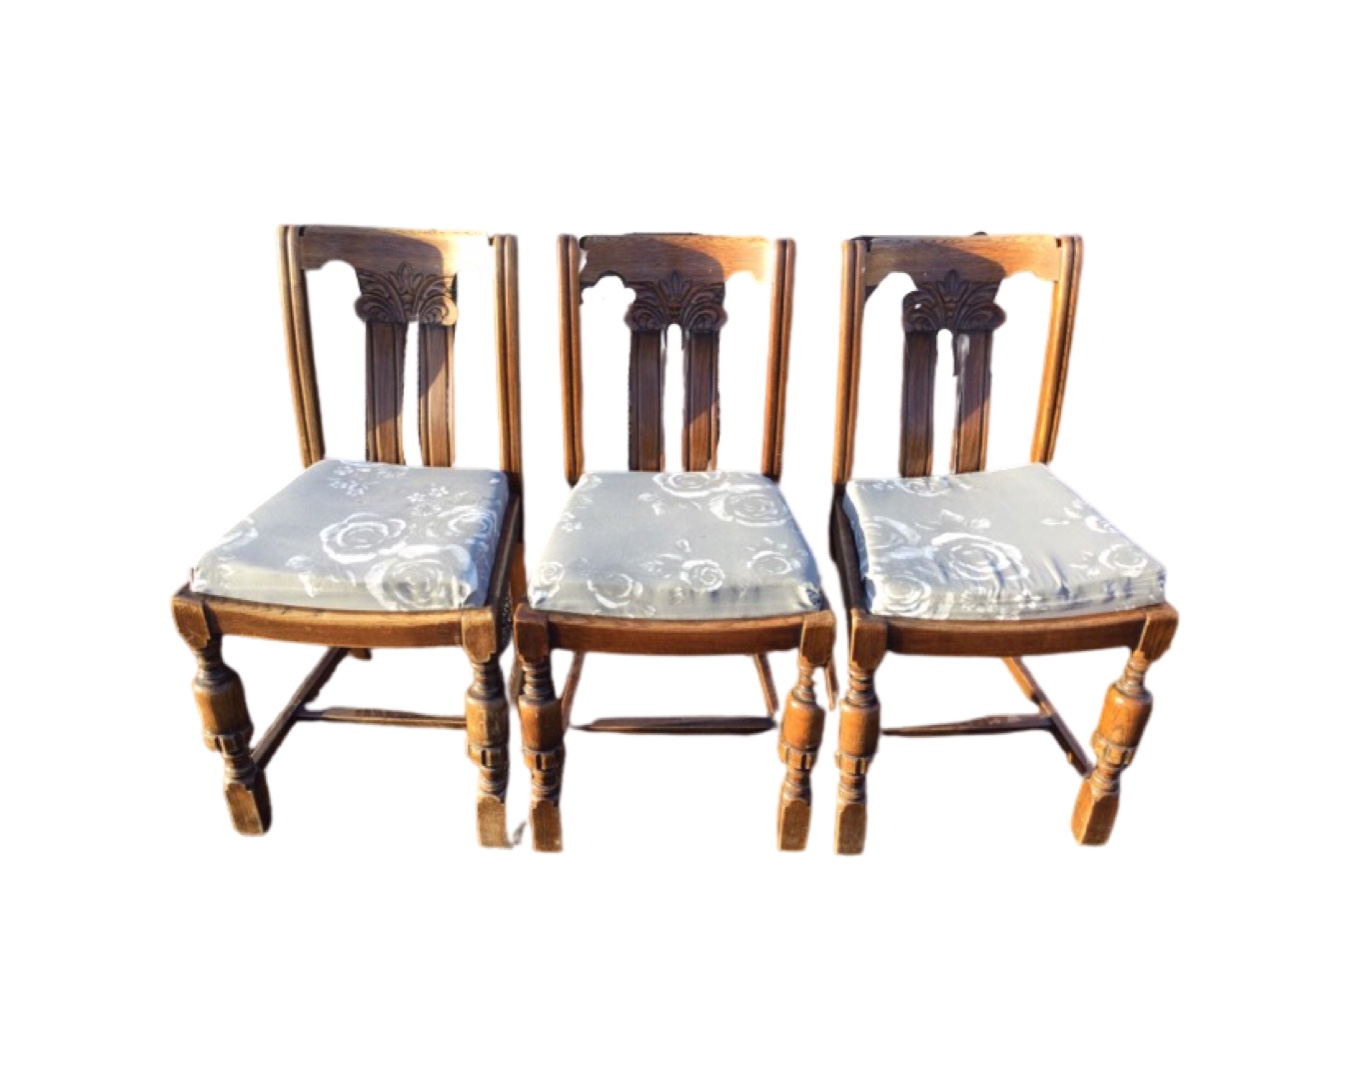 A set of three oak chairs with scroll carved backs and cushion seats, raised on turned legs joined